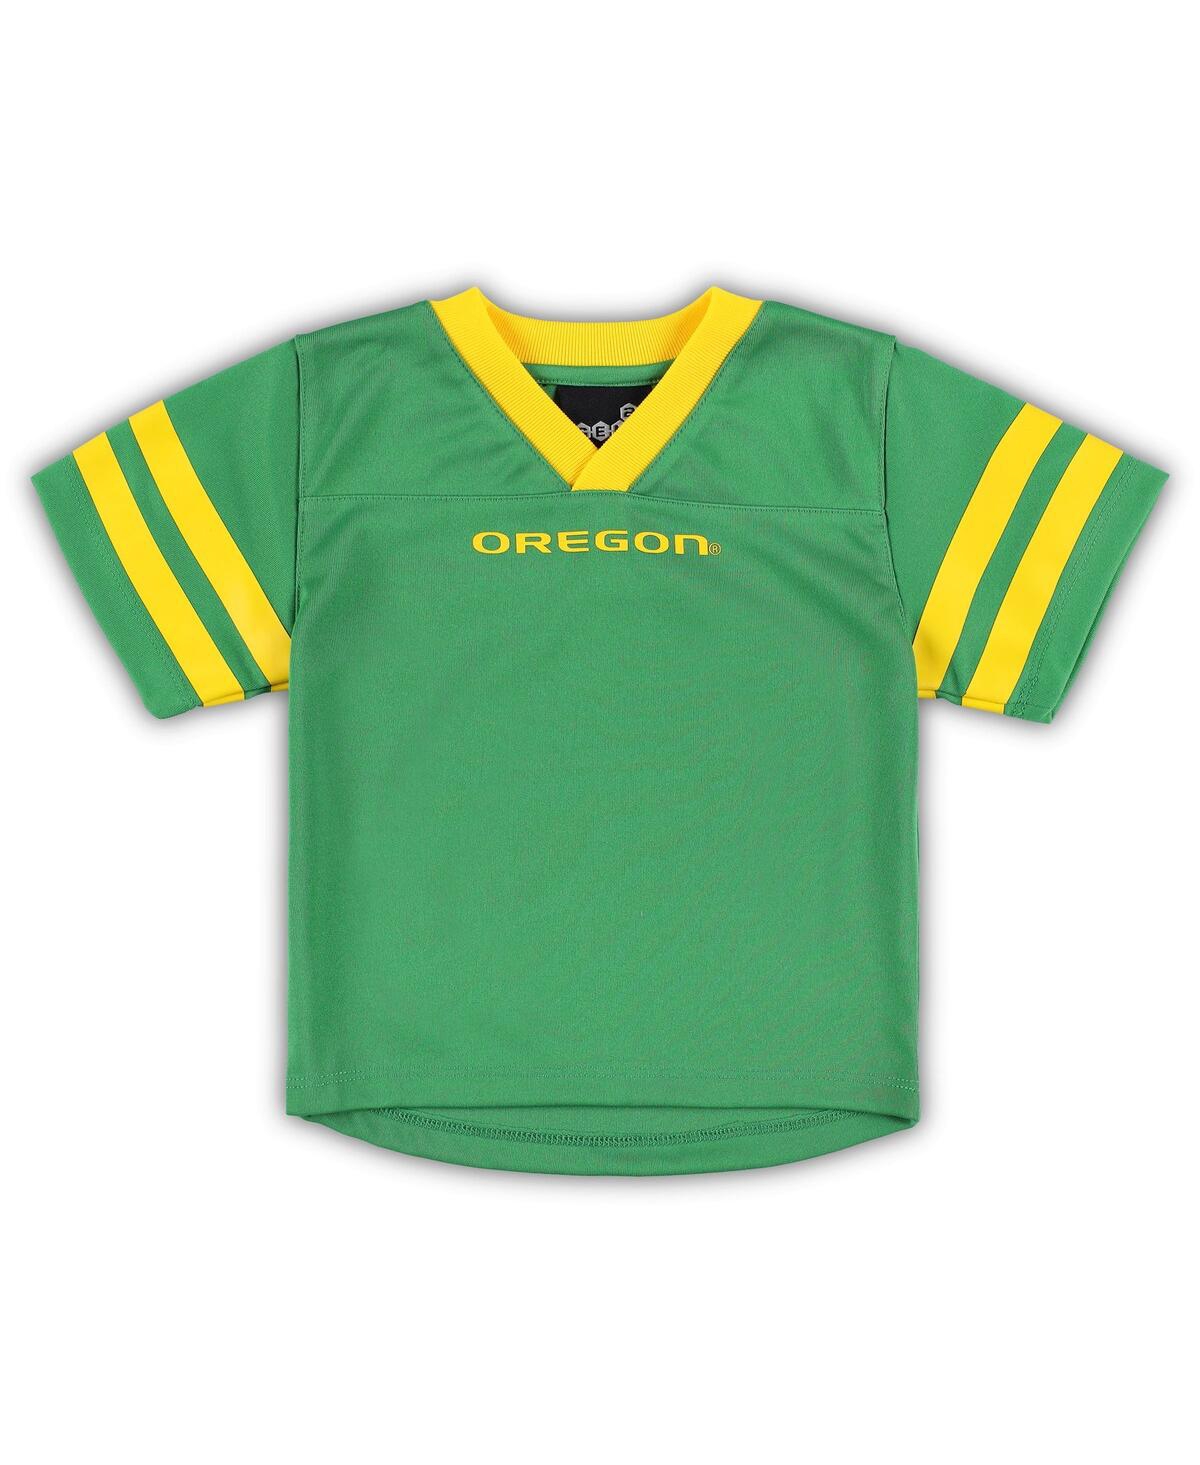 Shop Outerstuff Toddler Boys And Girls Green, Yellow Oregon Ducks Red Zone Jersey And Pants Set In Green,yellow